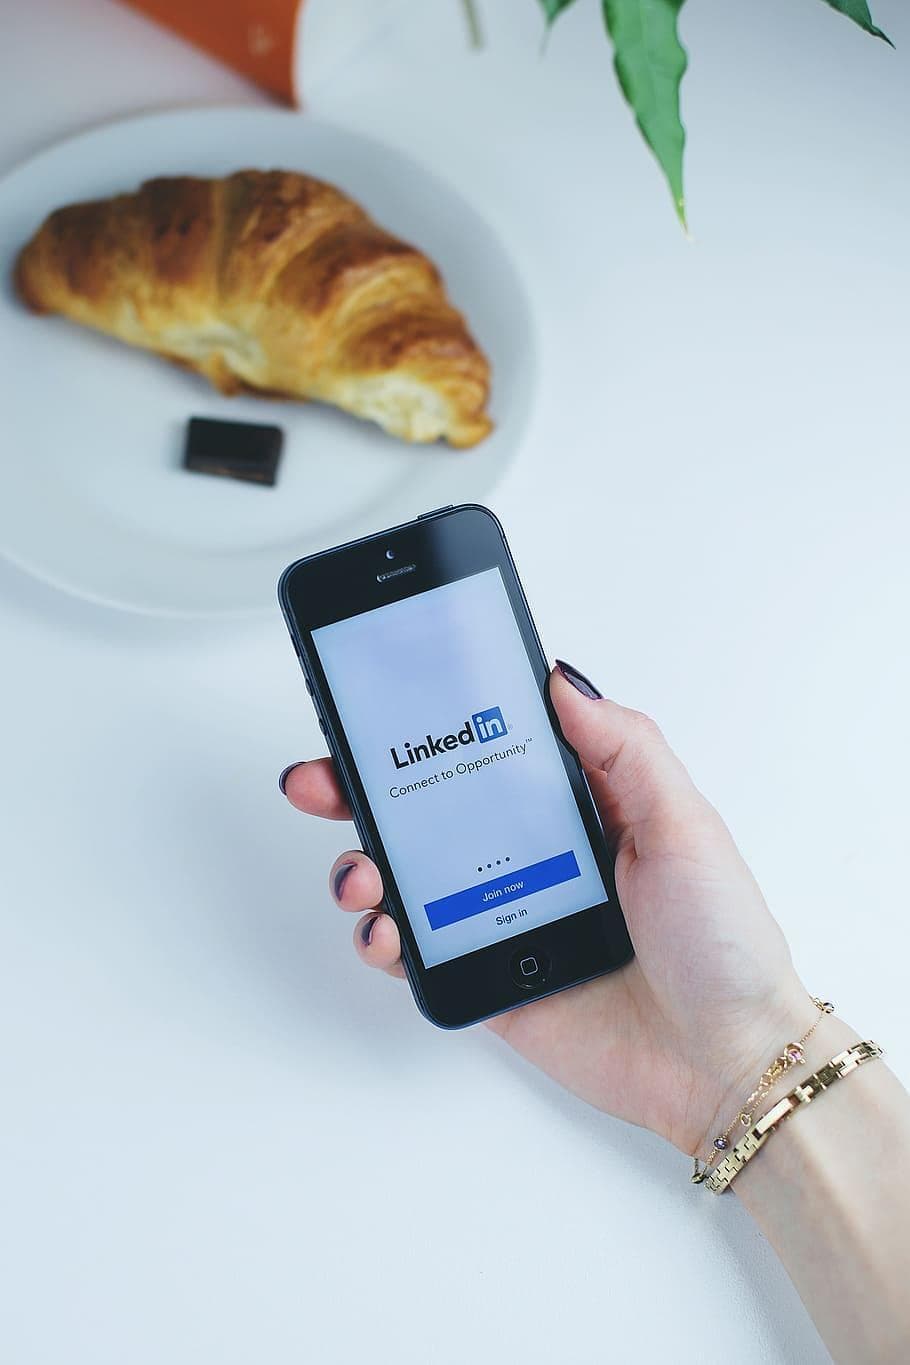 A person is holding a smartphone with the Linkedin app open. They are wearing two gold bracelets, and there is a croissant with chocolate on a plate in front of them.